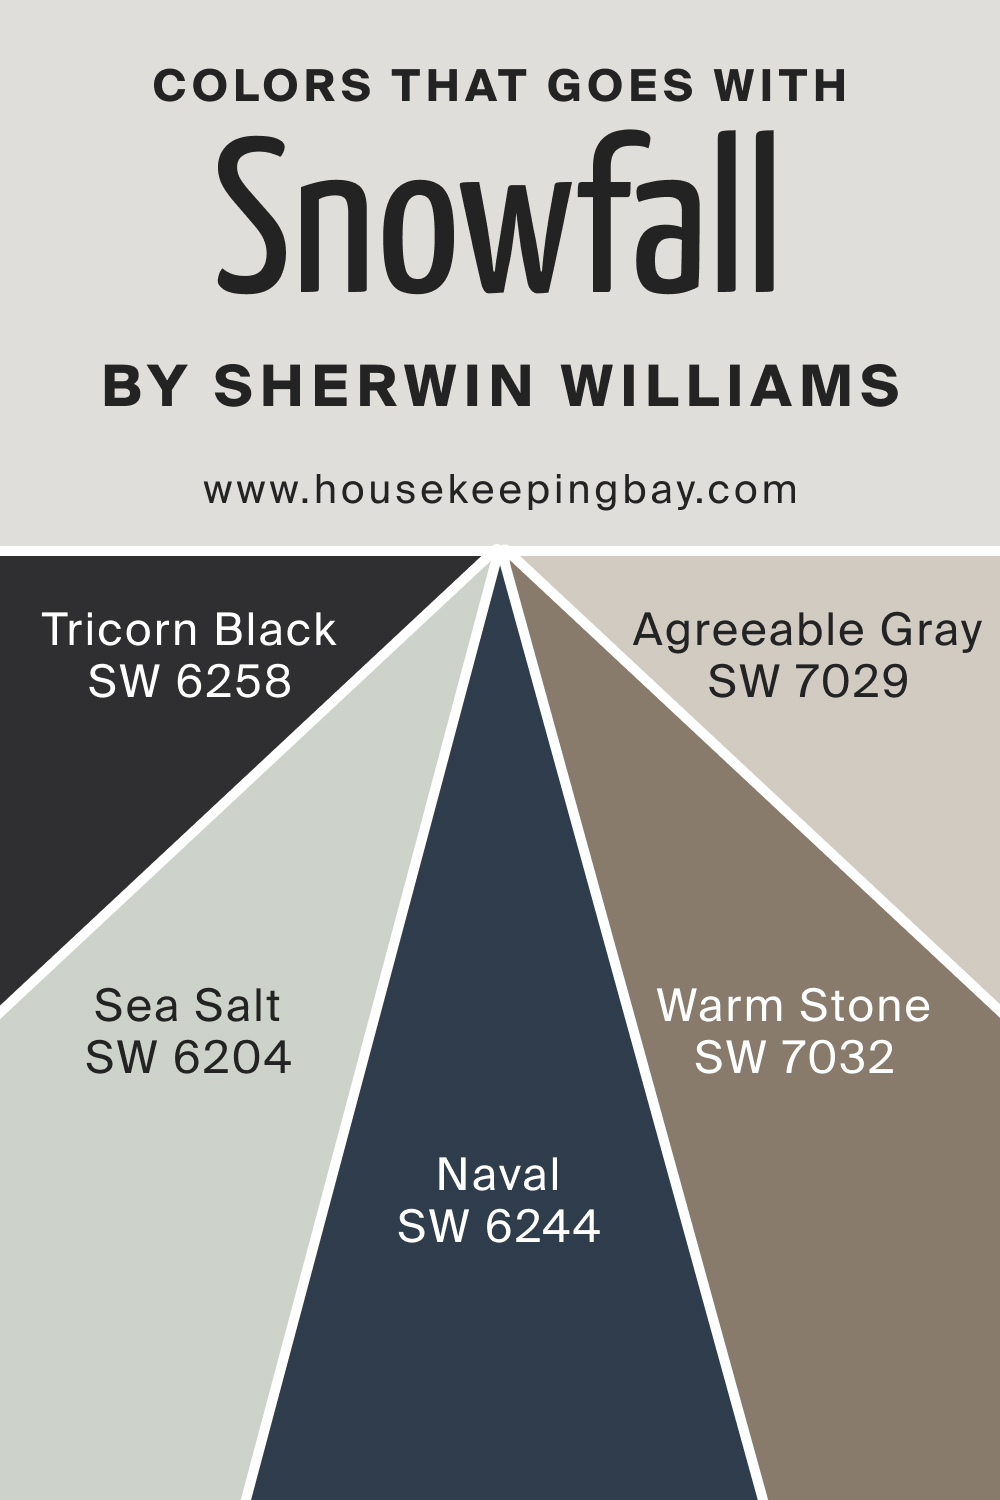 Colors that goes with Snowfall by Sherwin Williams